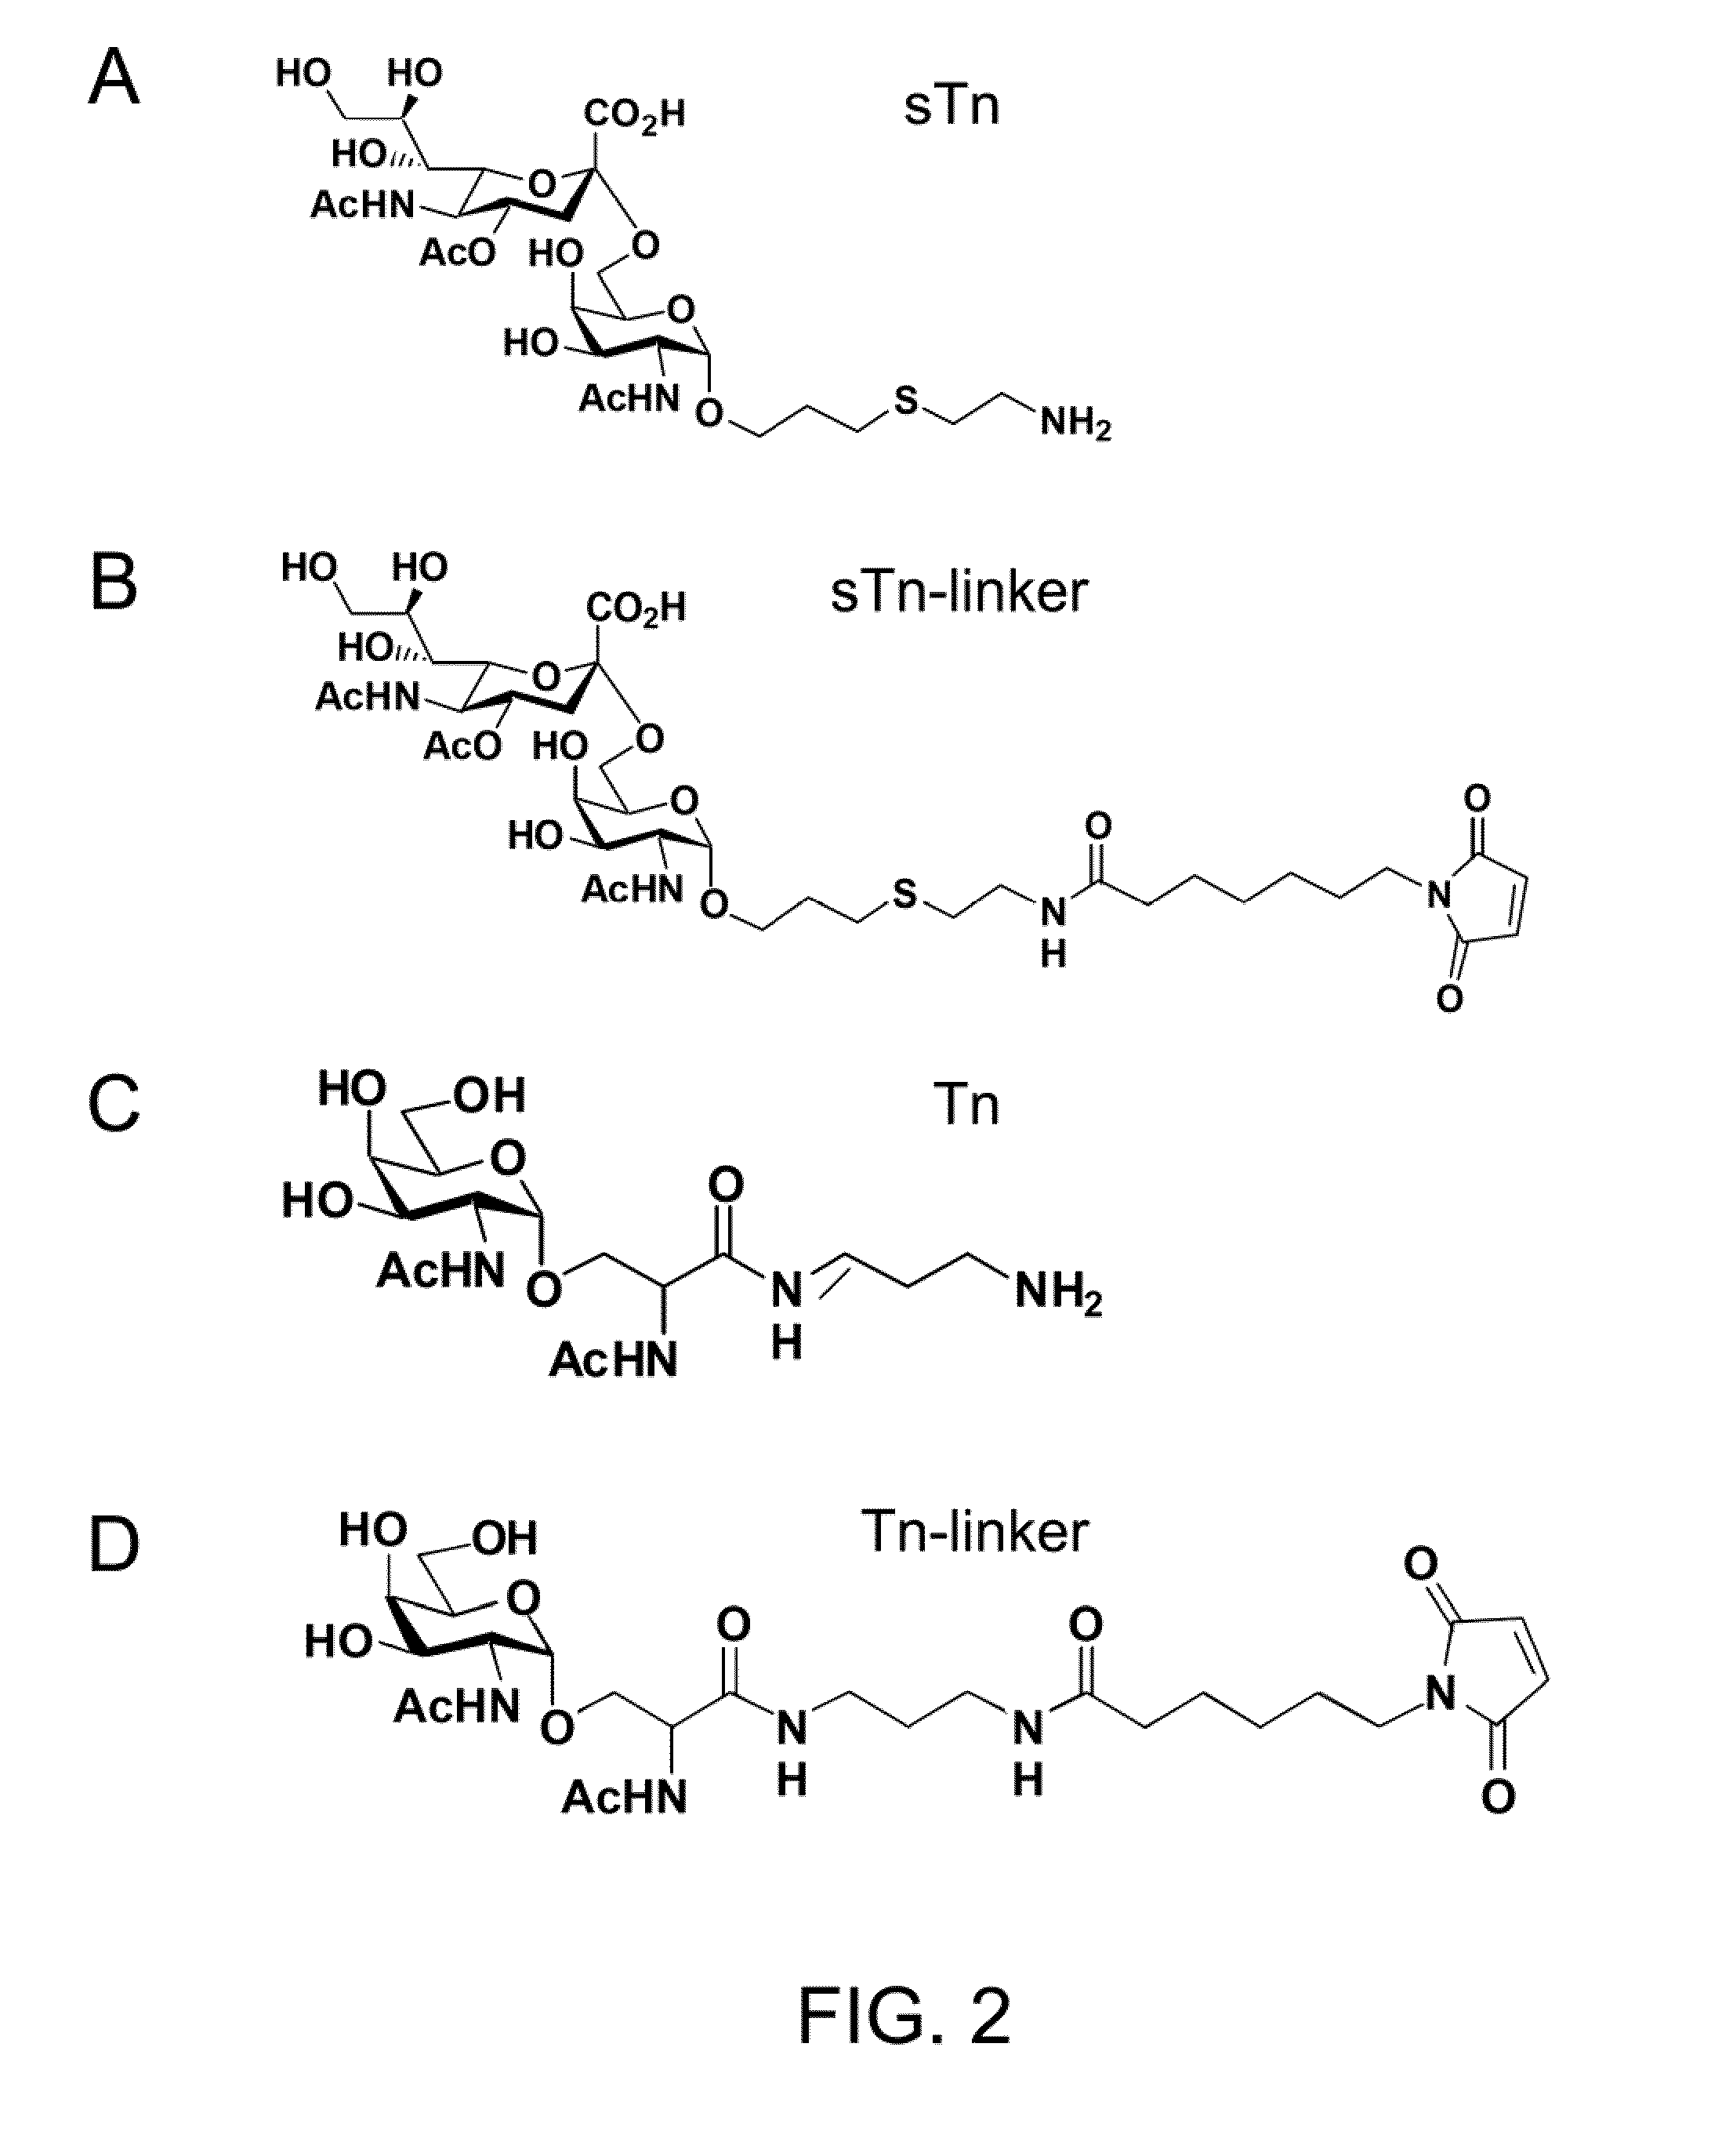 Immunogenic Protein Carrier Containing An Antigen Presenting Cell Binding Domain and A Cysteine-Rich Domain